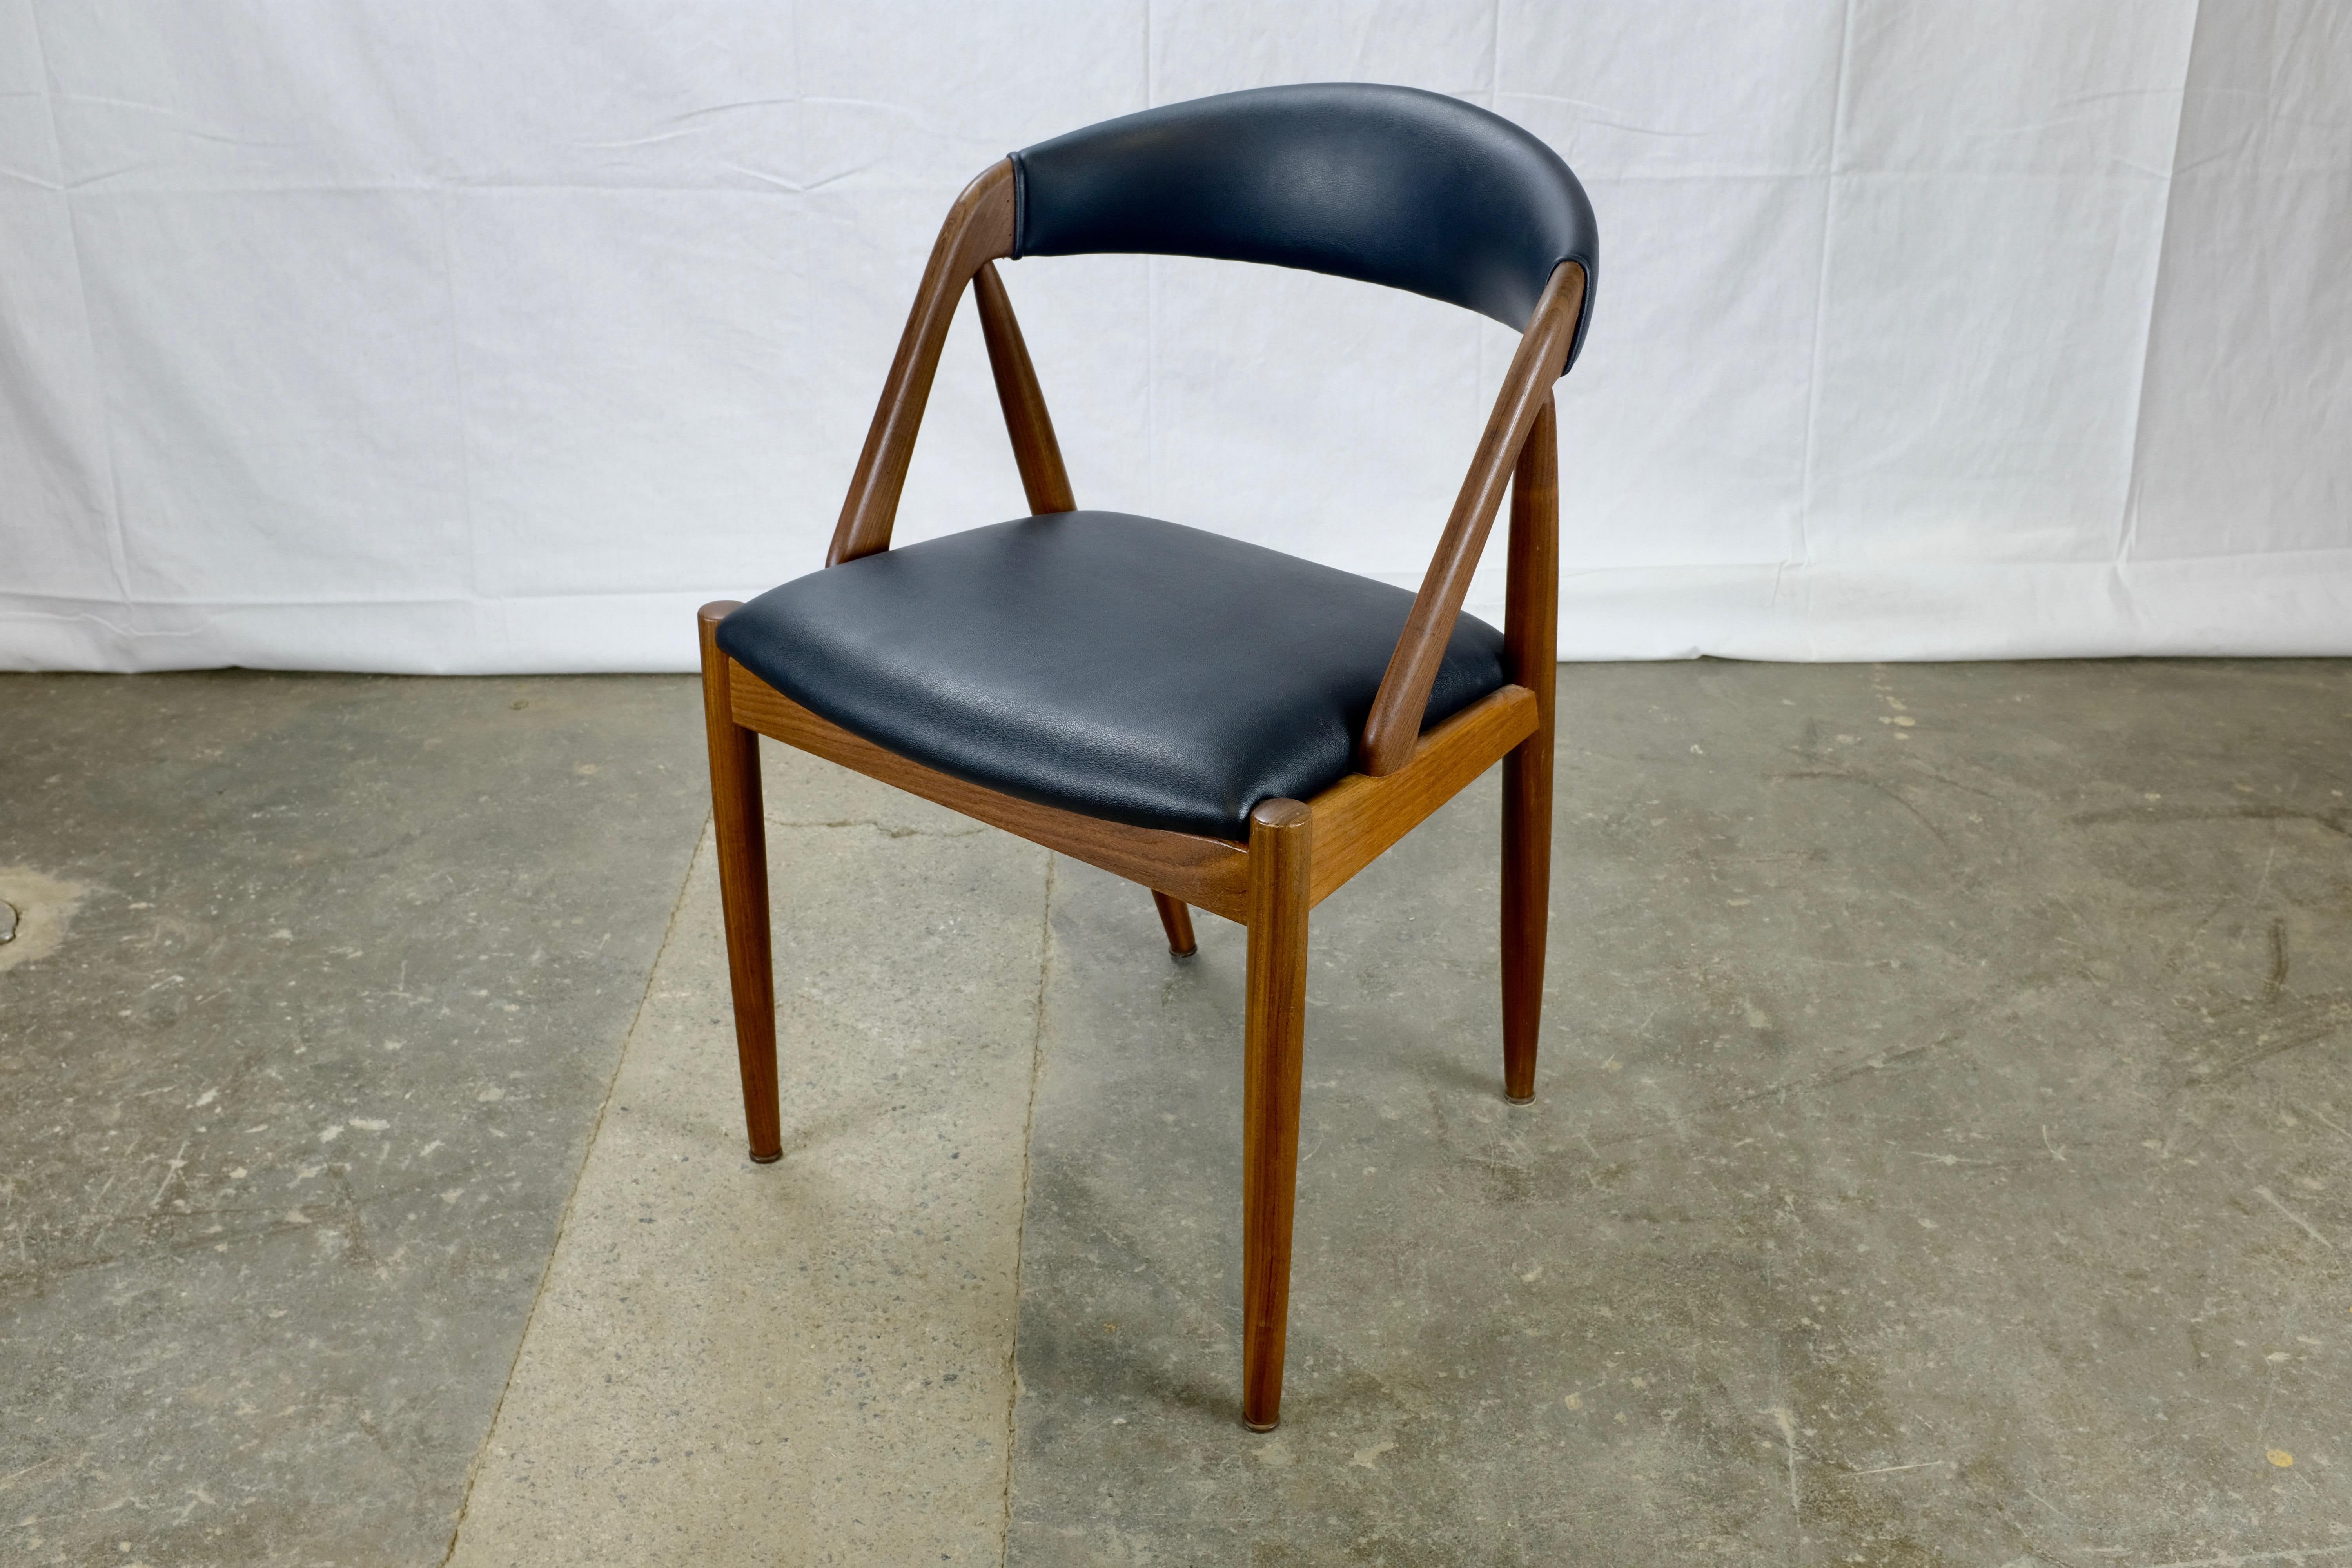 Set of four dining chairs designed by Kai Kristiansen and made in Denmark by Schou Andersen.

The chairs feature distinctive A-shaped frames terminating in gracefully curved backrests.

The solid teak frames have been refinished and the seats